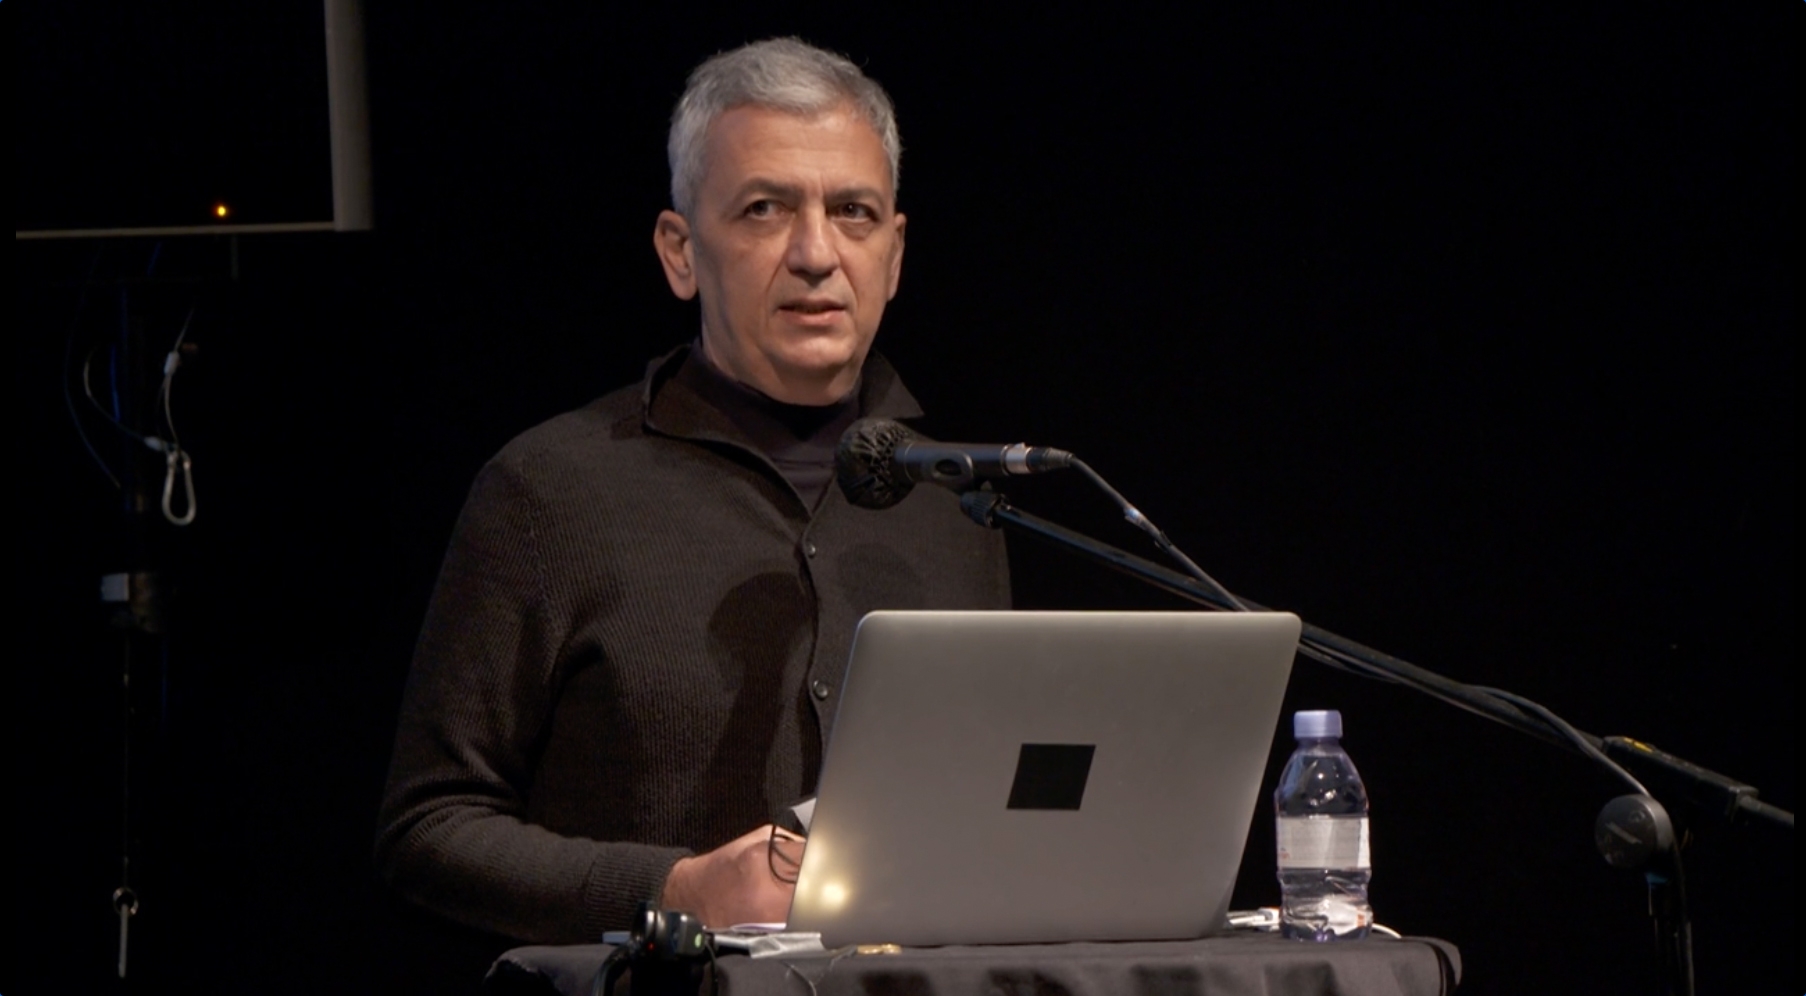 Watch now: "Changing Hands: Objects on the Move", a symposium curated by Akram Zaatari at Centre Pompidou